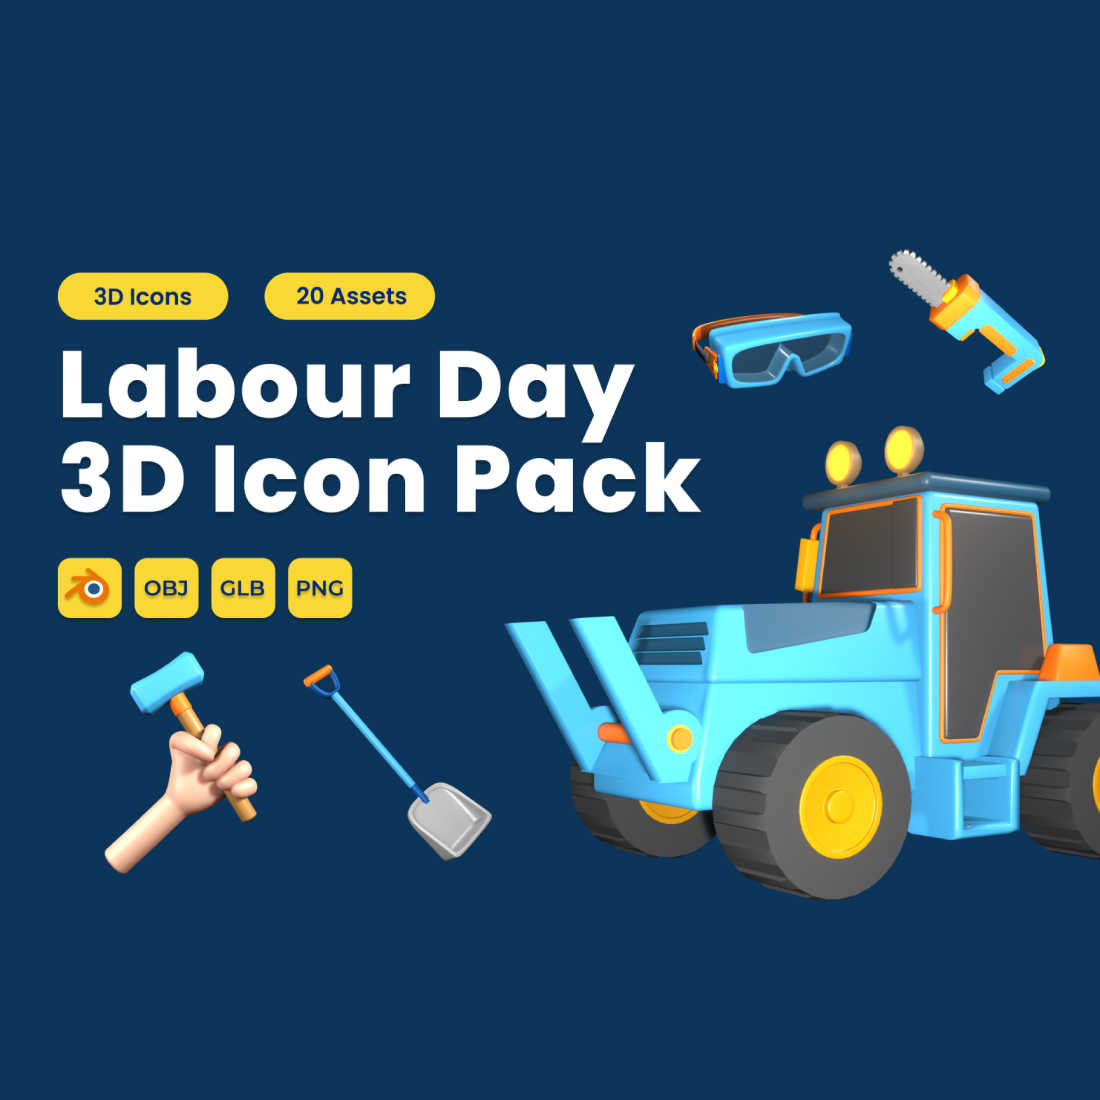 Labour Day 3D Icon Pack Vol 10 cover image.